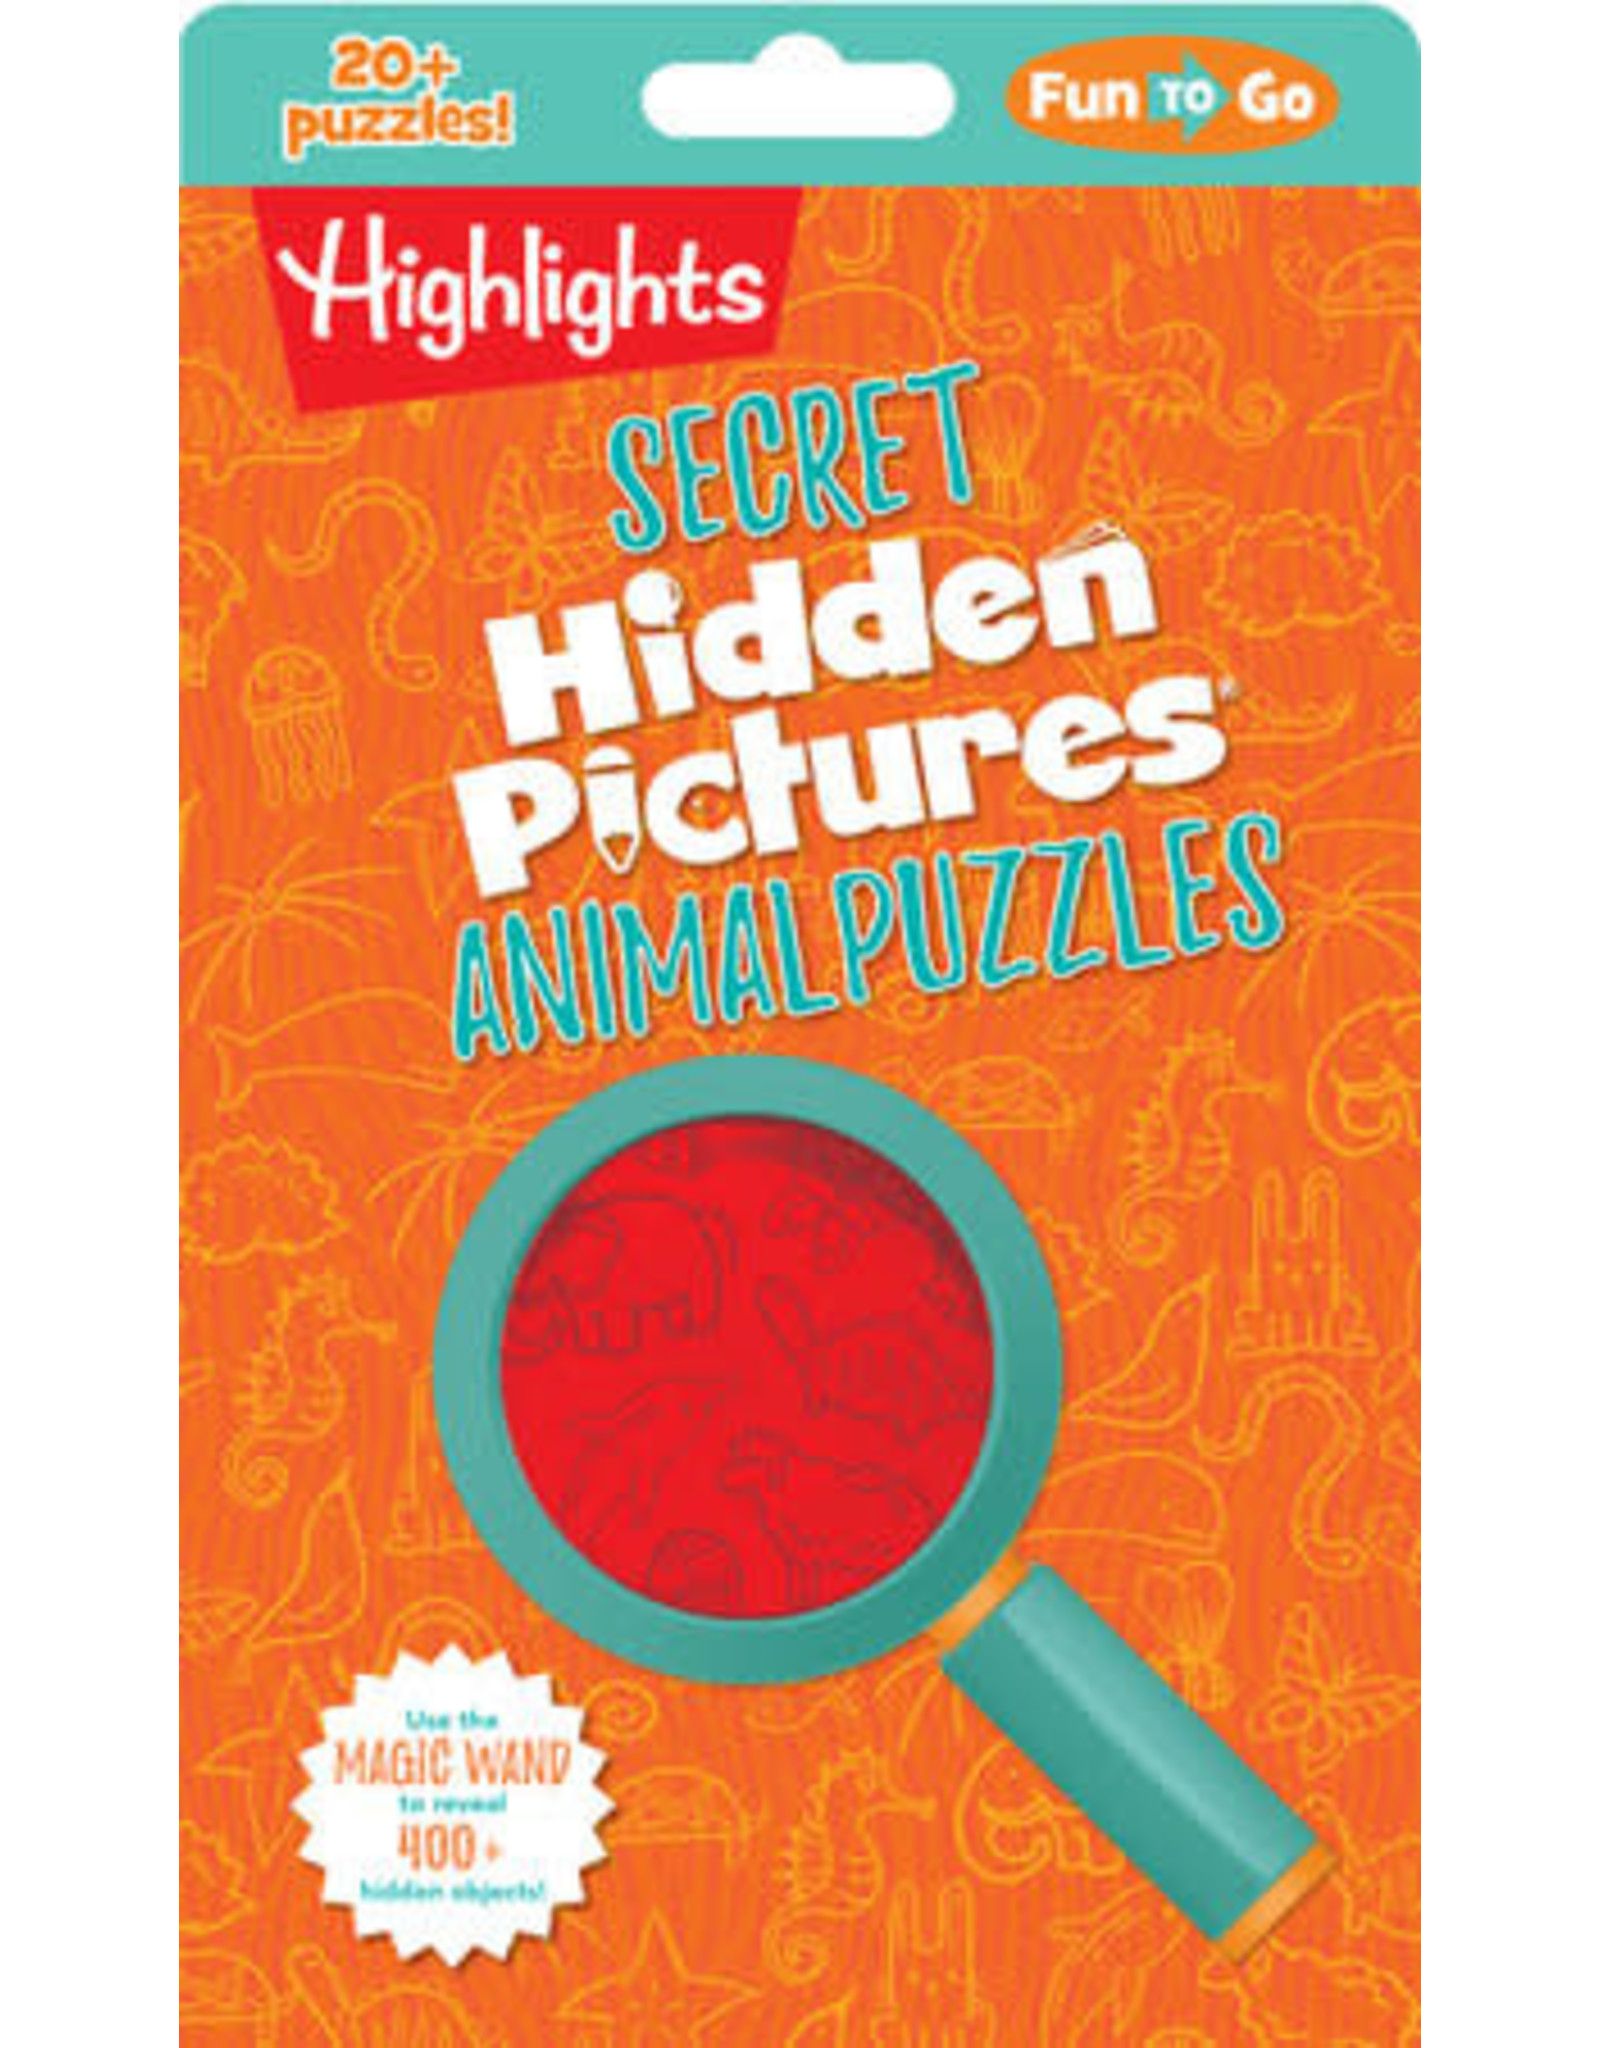 Highlights Secret Hidden Pictures - Animal Puzzles